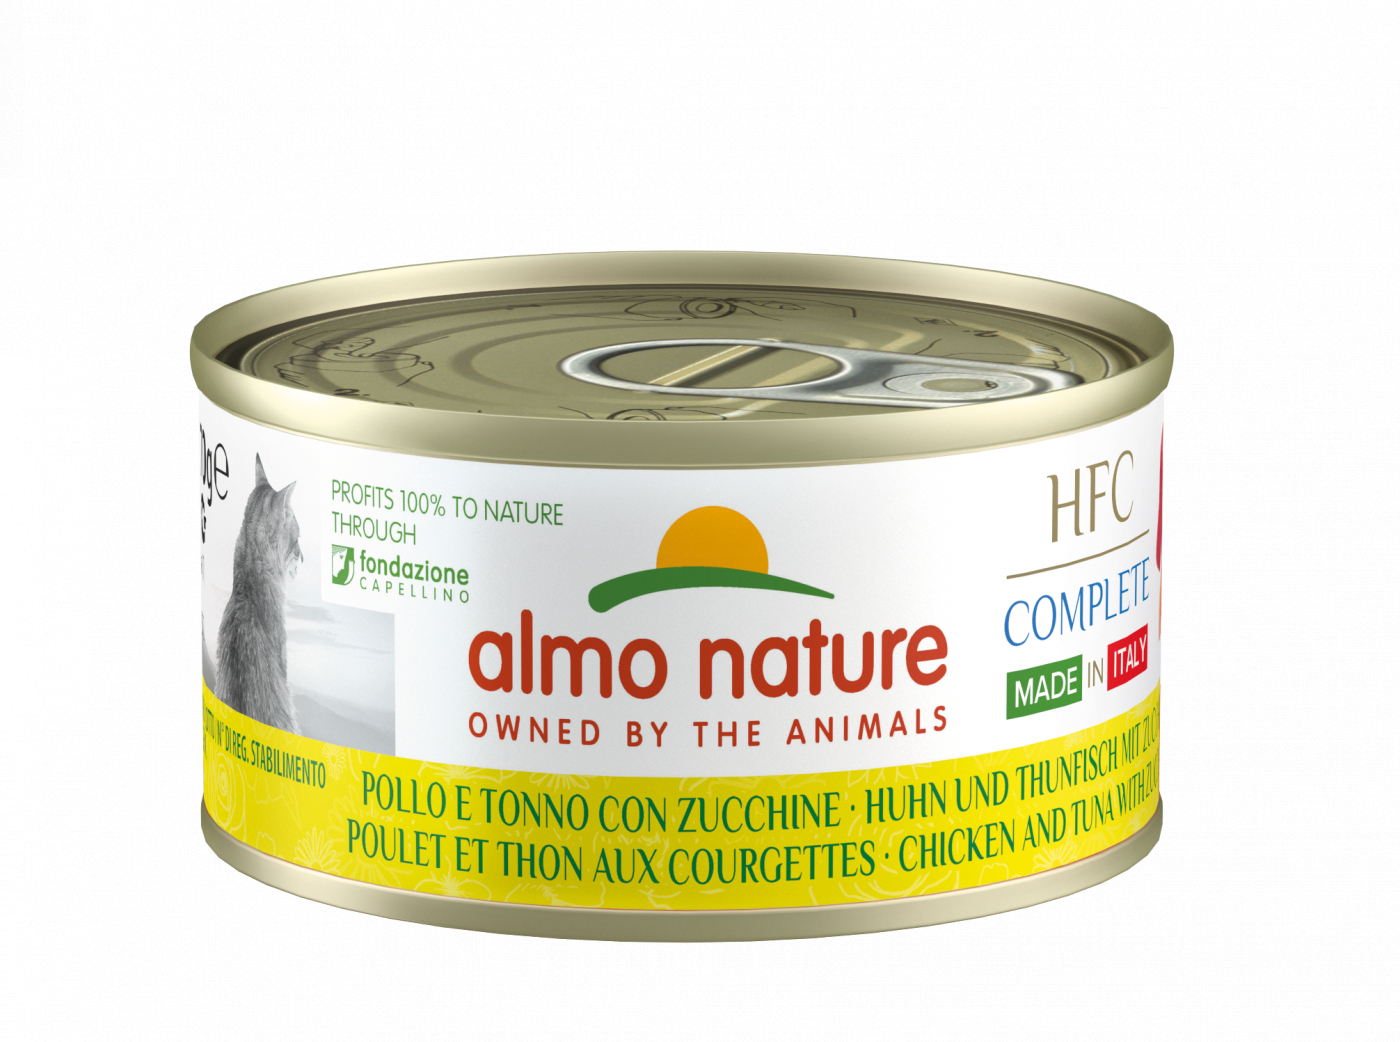 ALMO NATURE HFC Complete Made In Italy Grain Free - 2 smaken